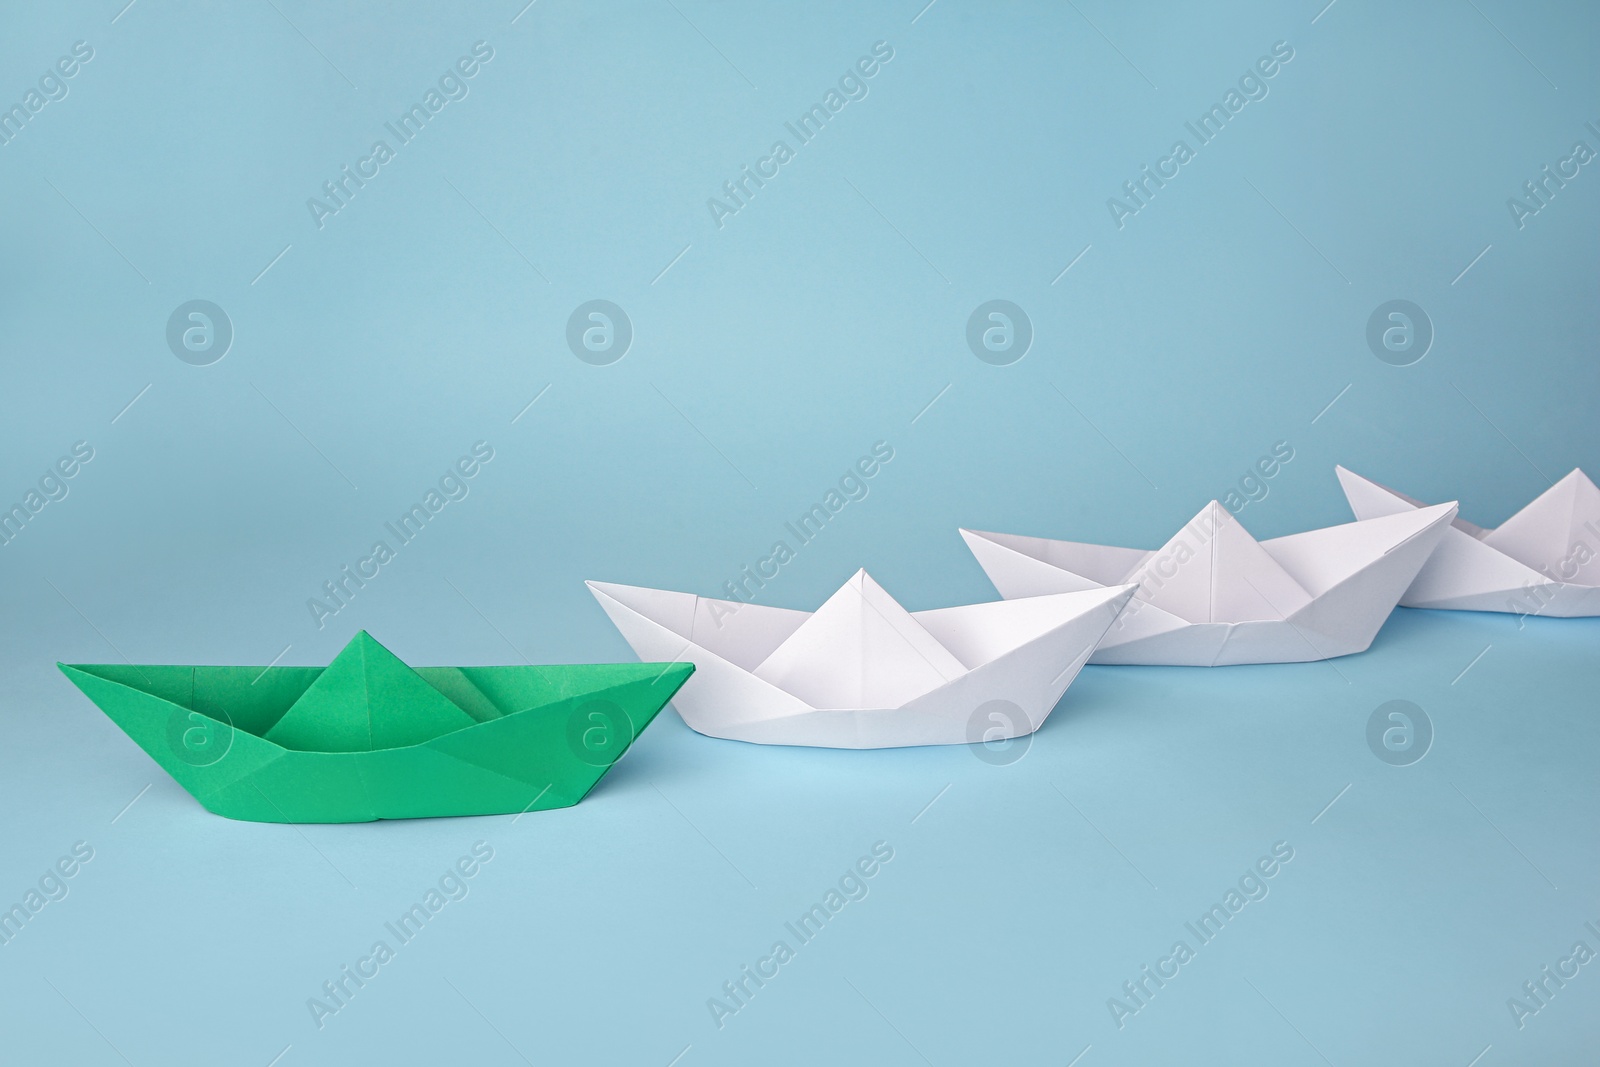 Photo of Group of paper boats following green one on light blue background. Leadership concept